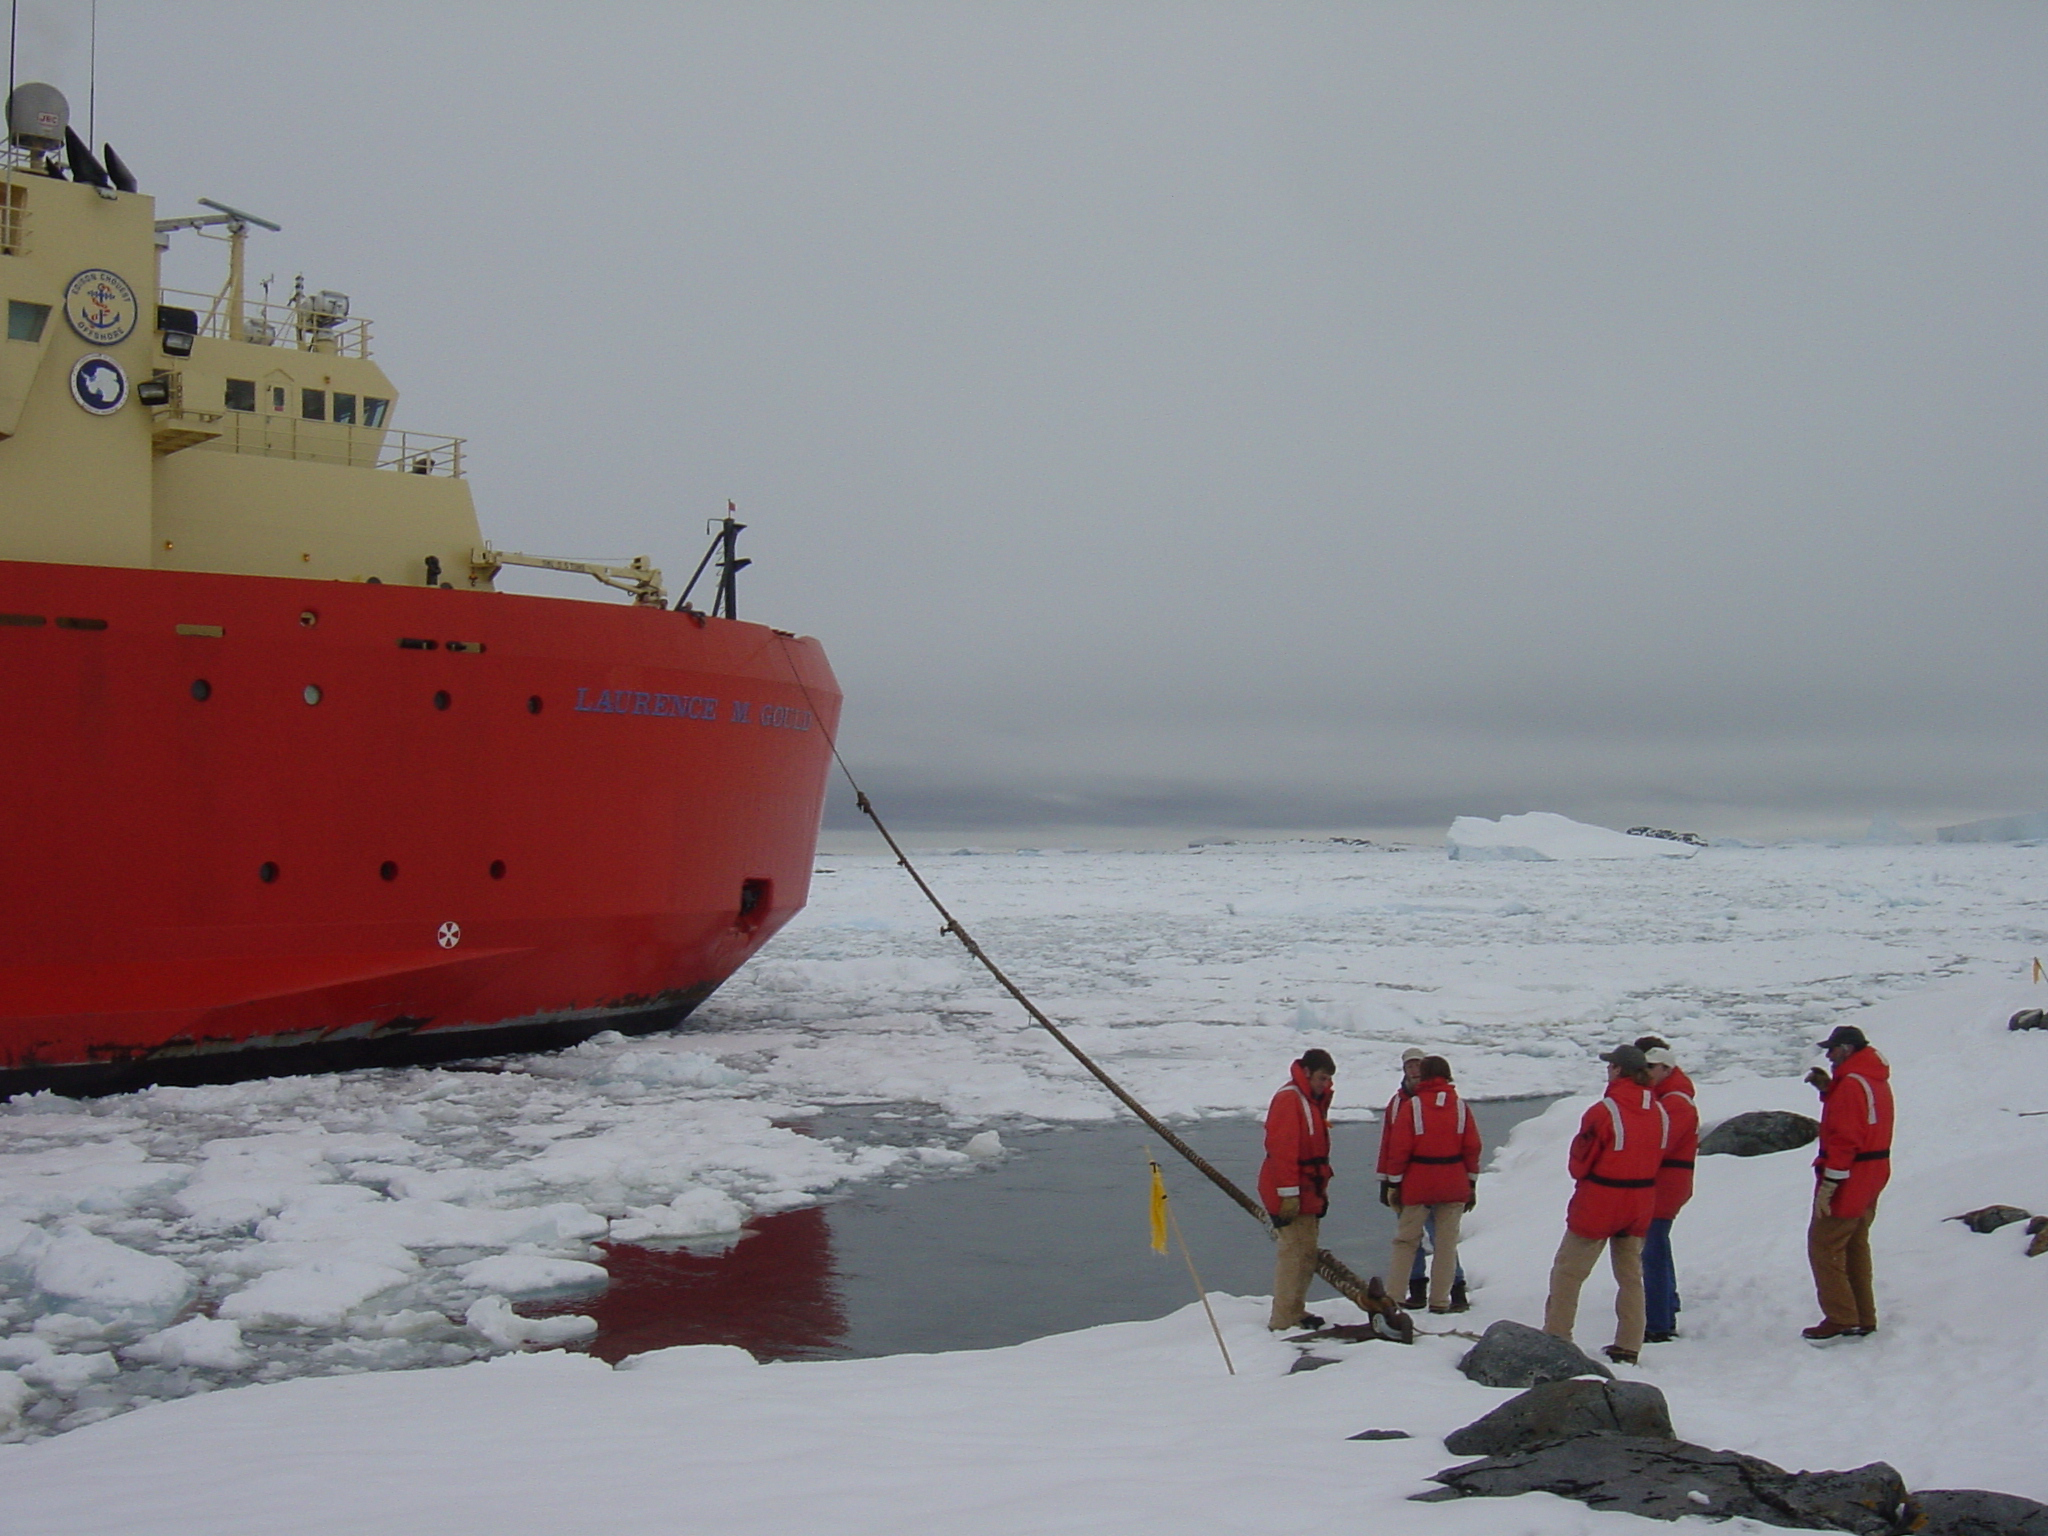 The front side view of a red and yellow ship in icy water.